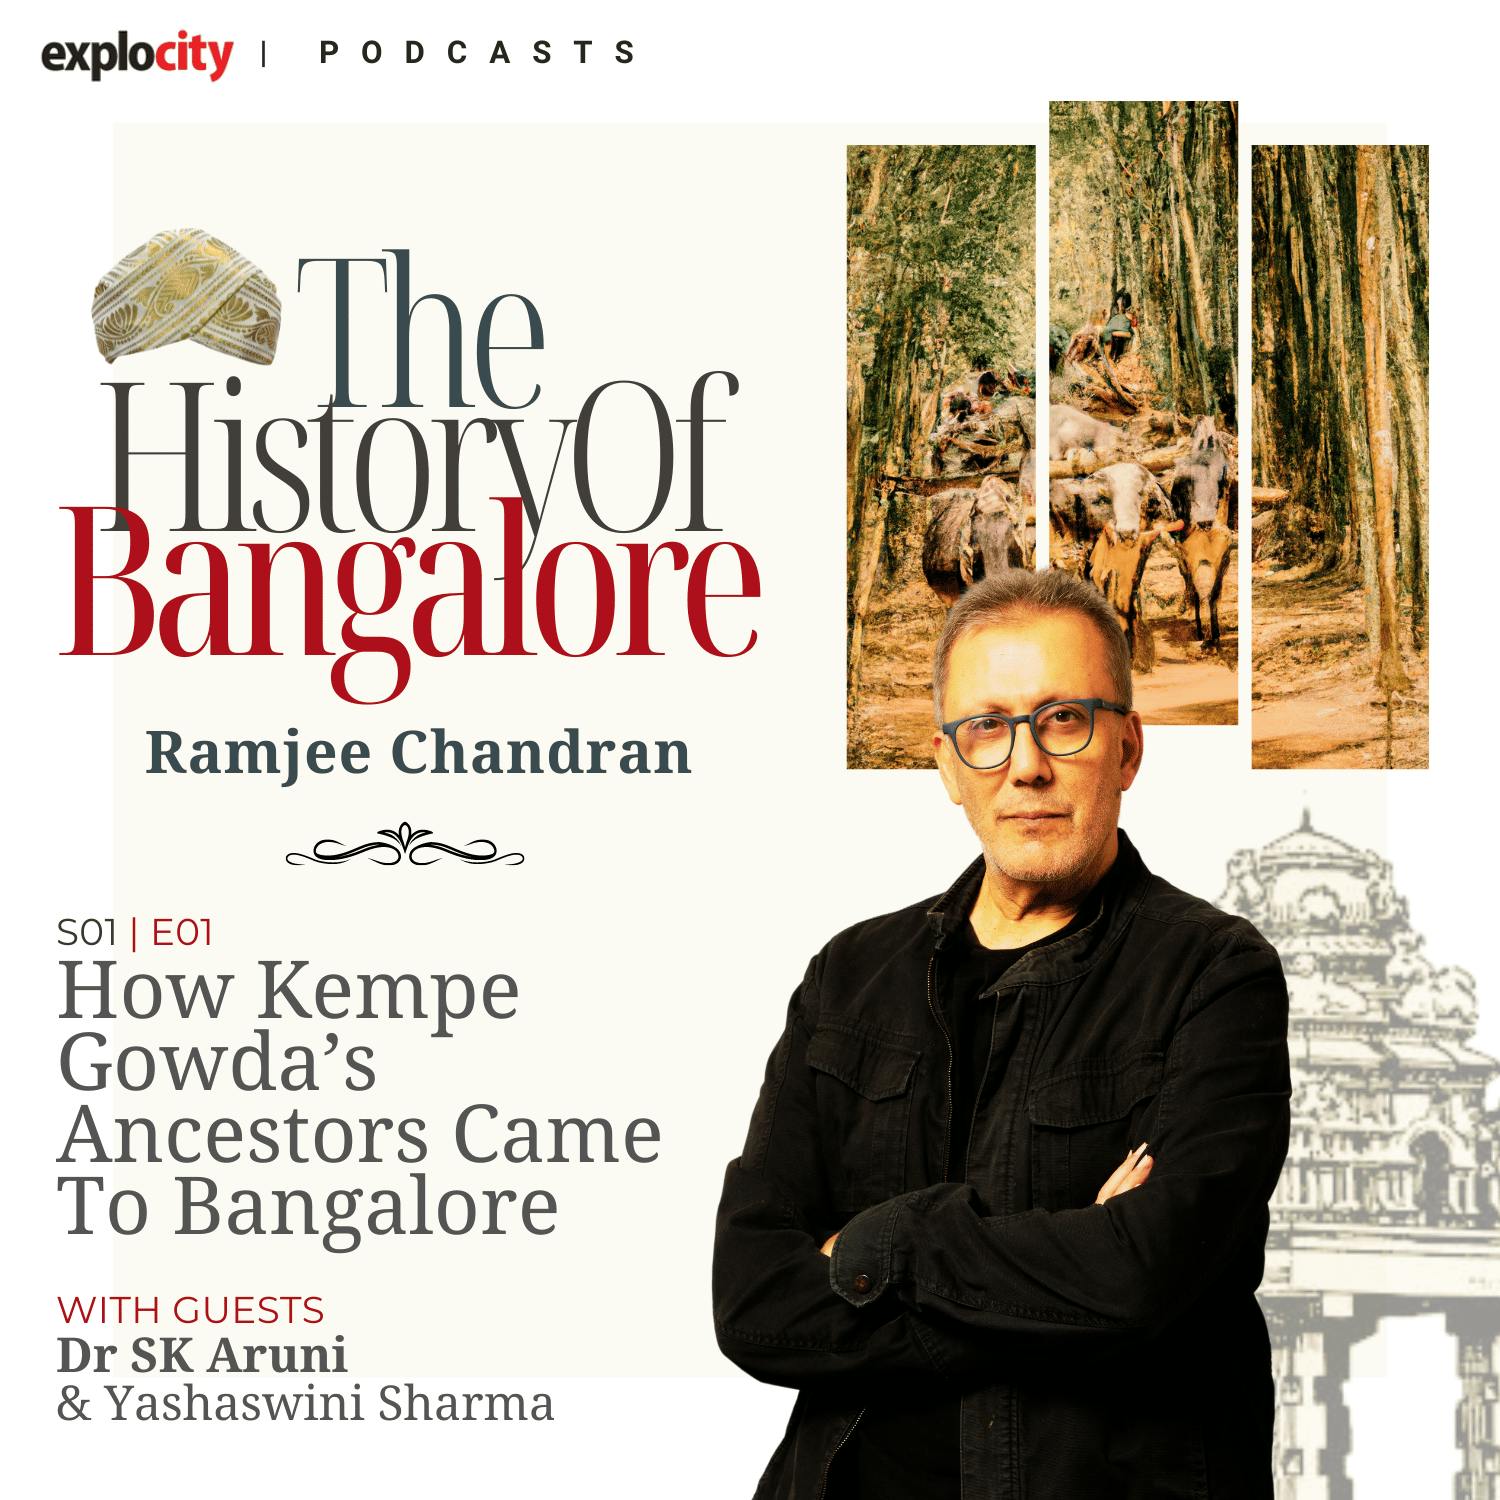 How Kempe Gowda's Ancestors Came To Bangalore